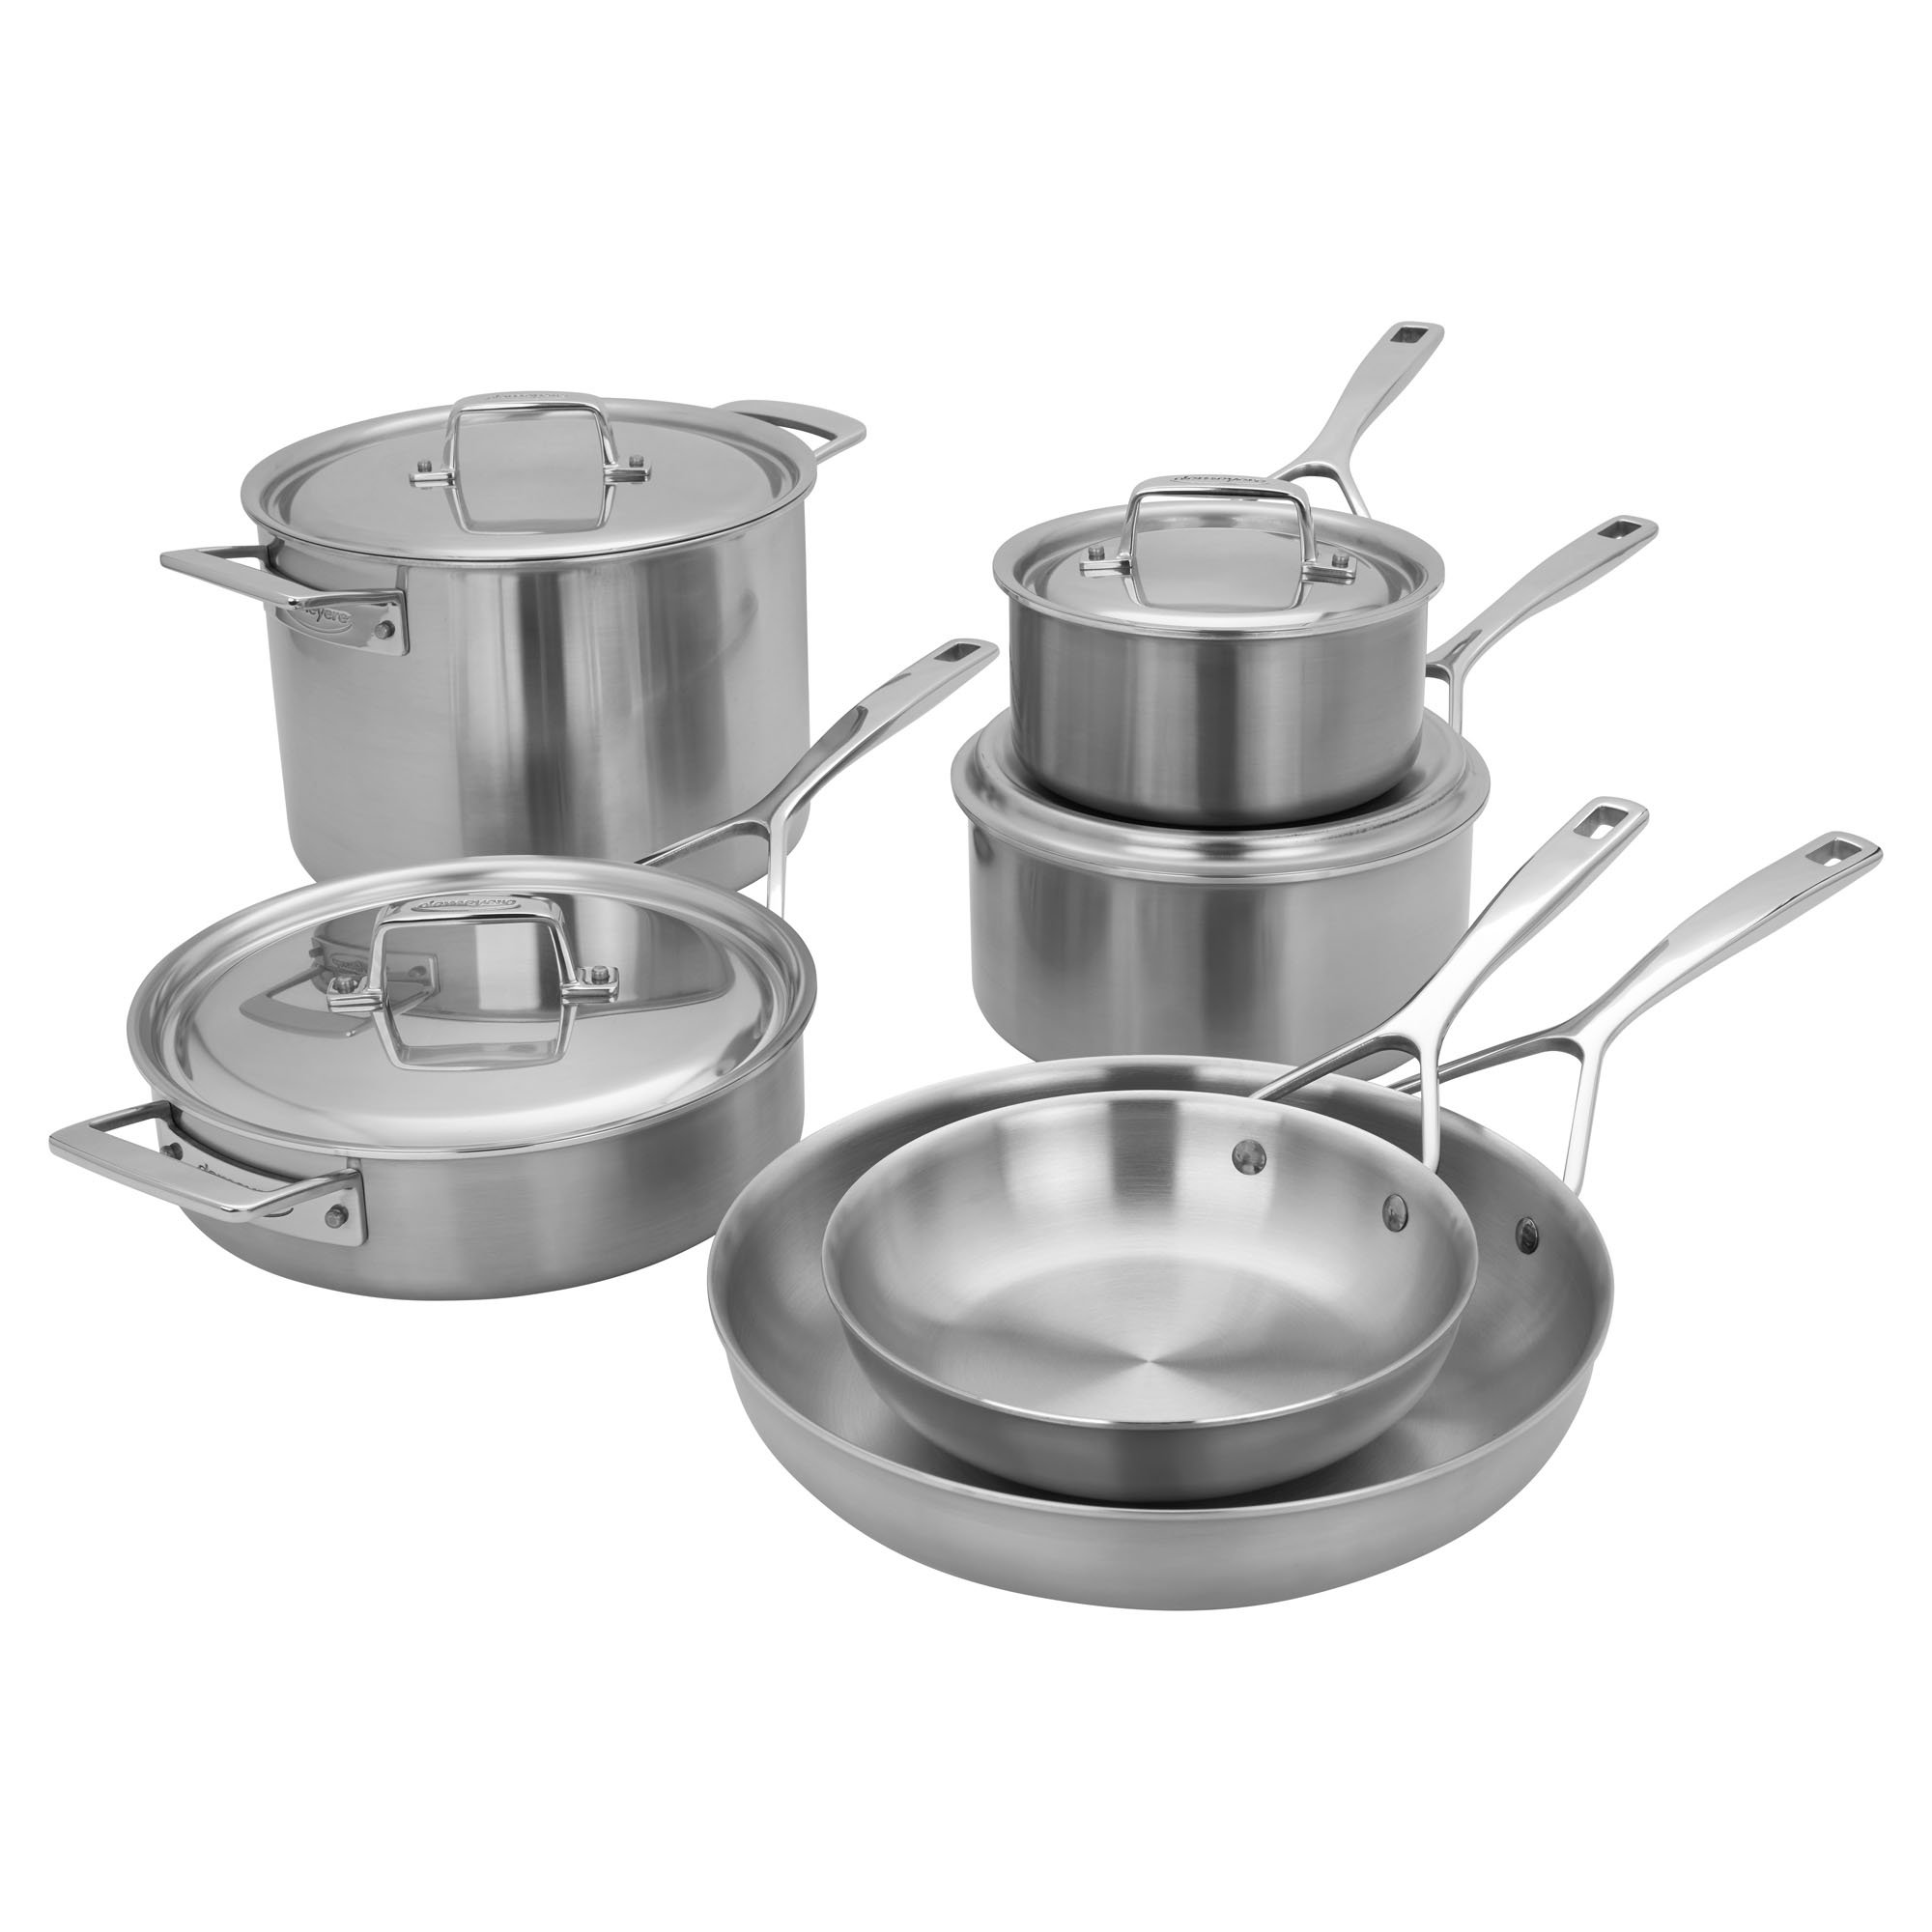 Demeyere Industry 5-Ply 10-Pc Stainless Steel Cookware Set - Stainless Steel  - 8 requests